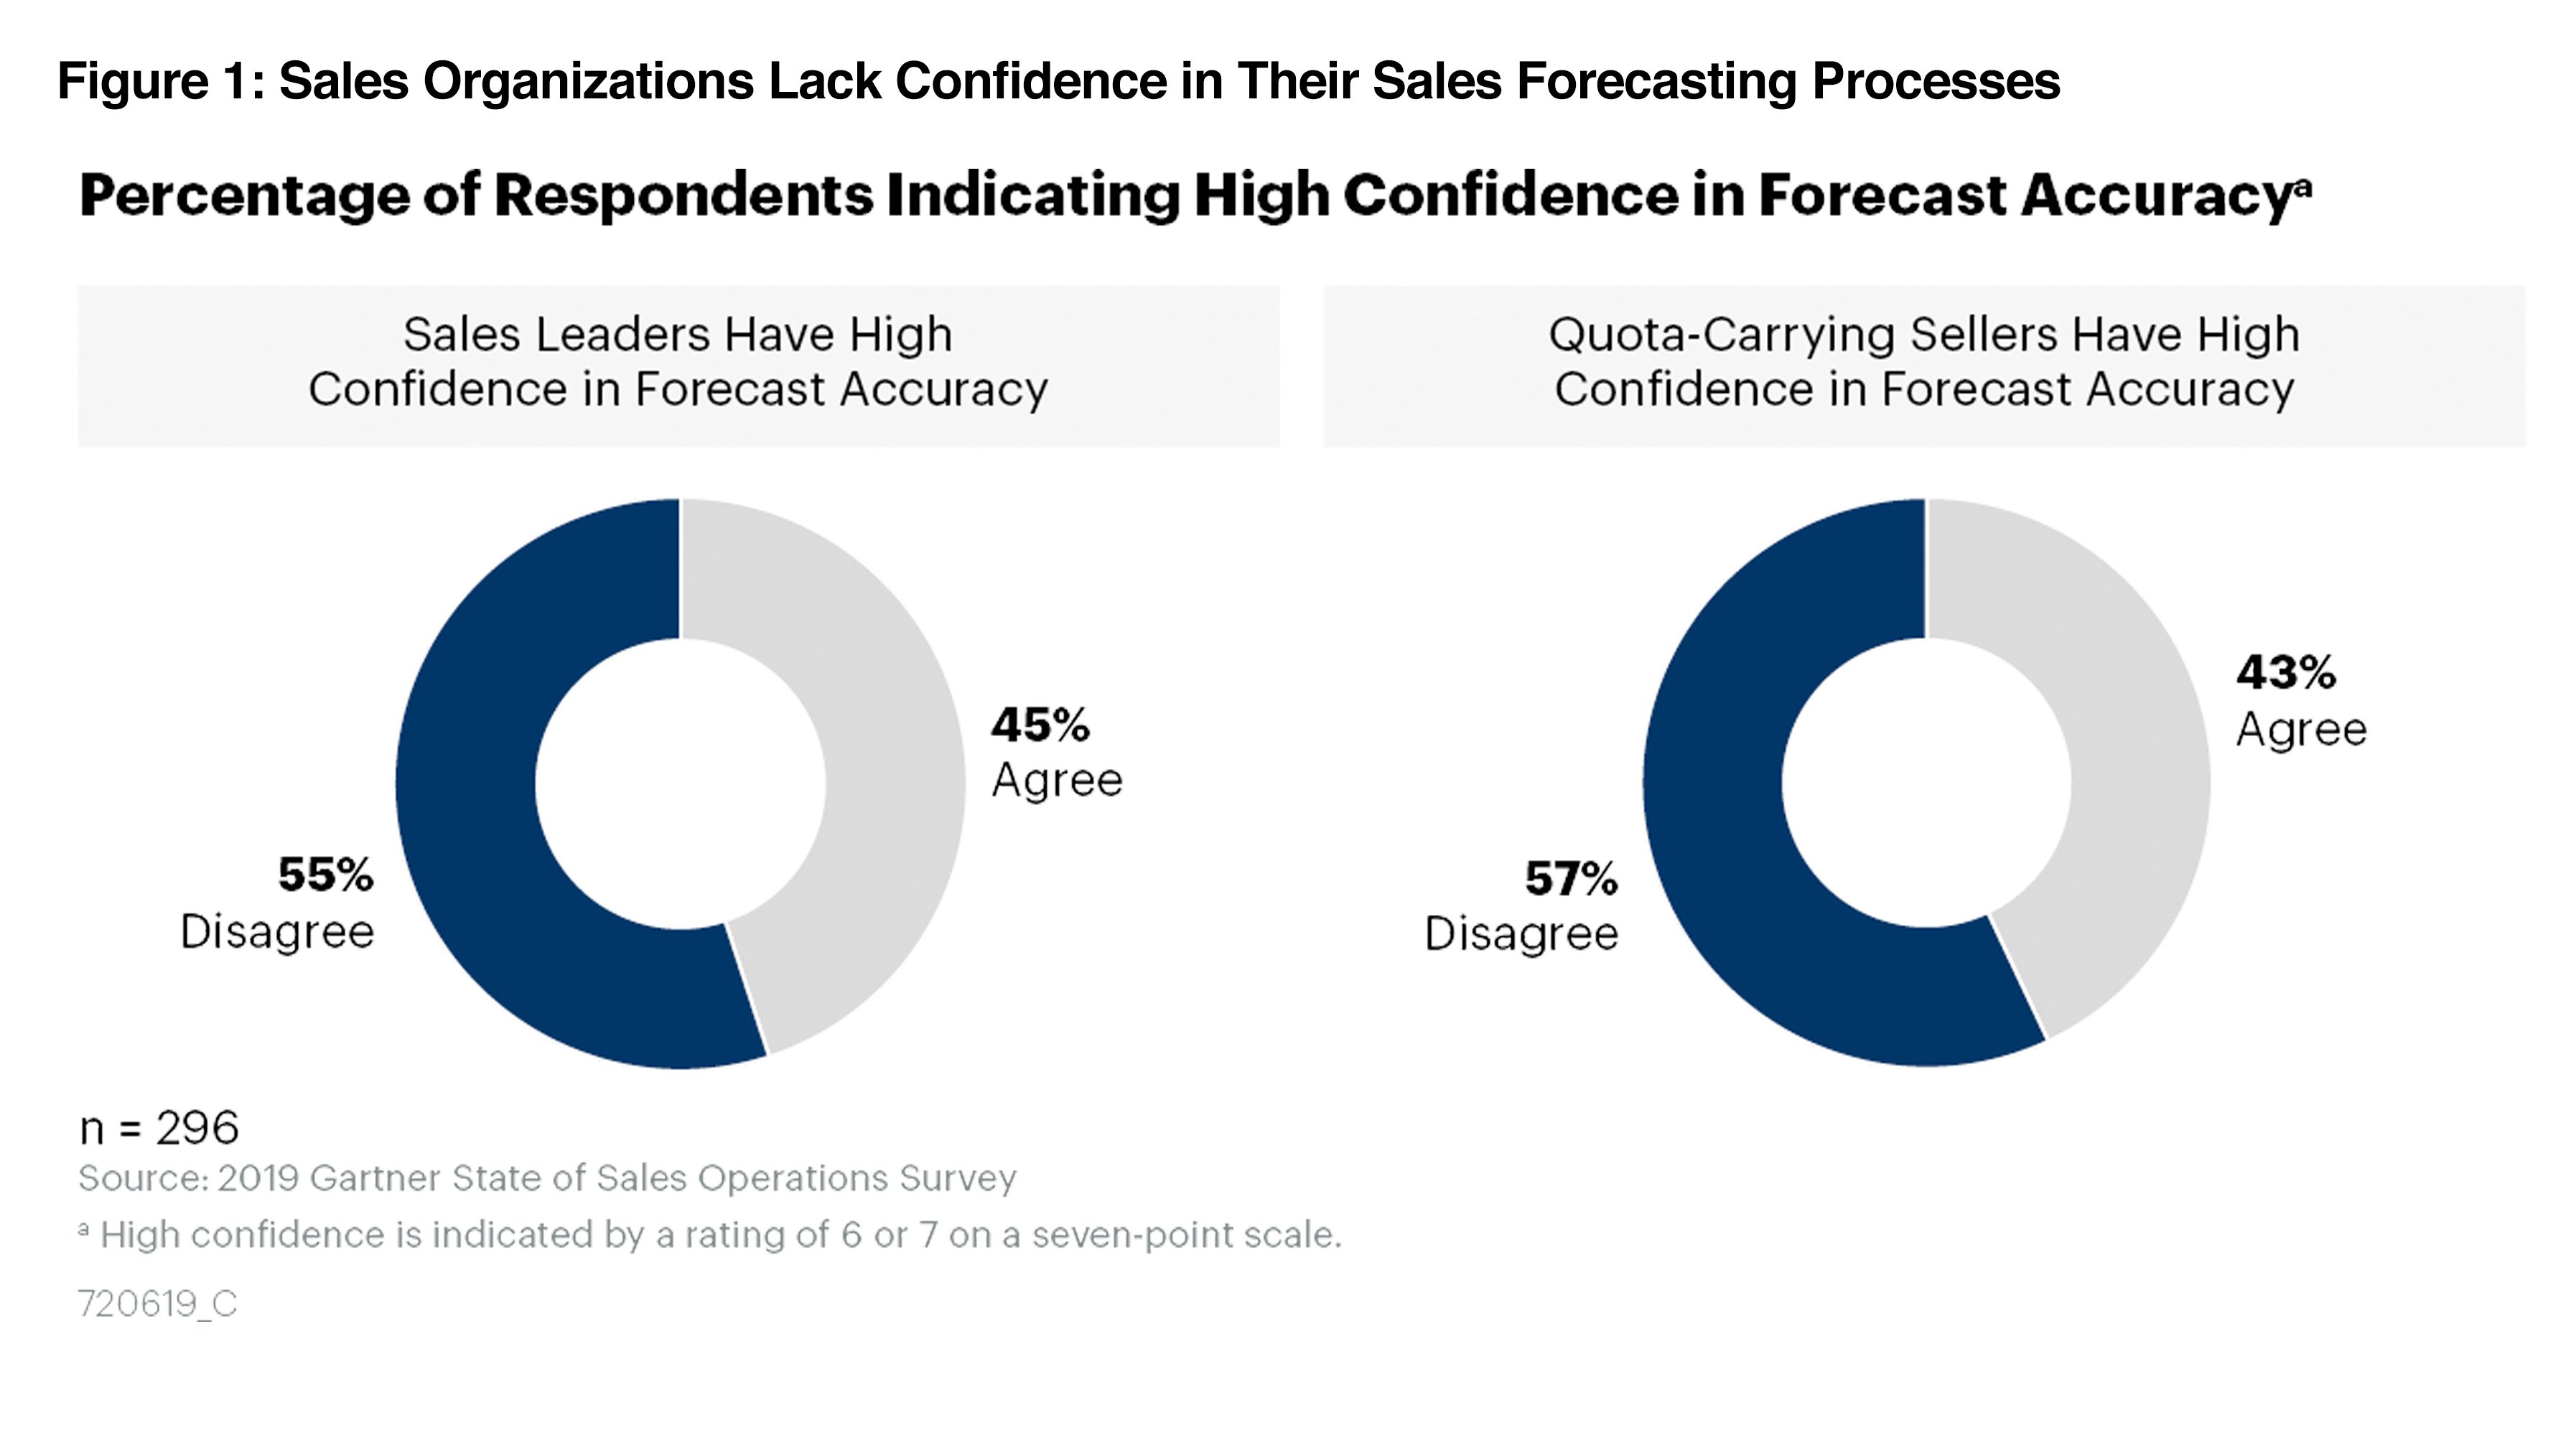 Two pie charts showing the percentages of sales leaders and quota-carrying sellers that have high confidence in forecast accuracy